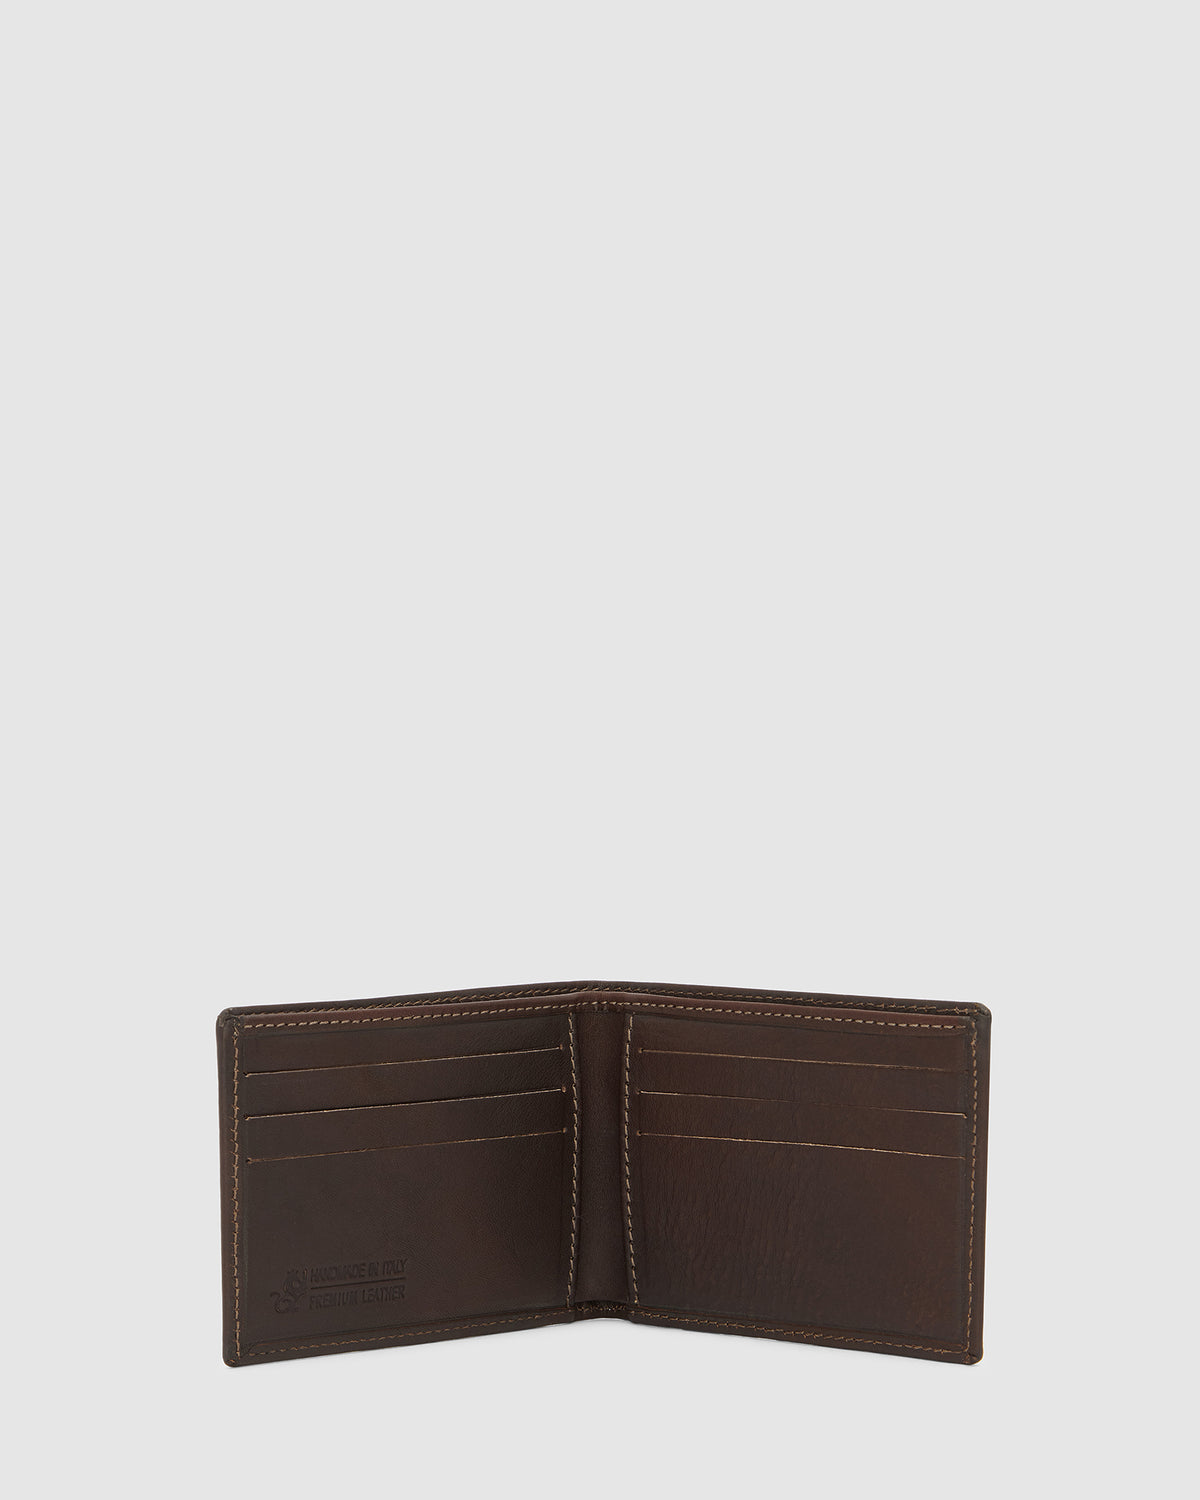 Rossini Brown Trifold Wallet - but,since